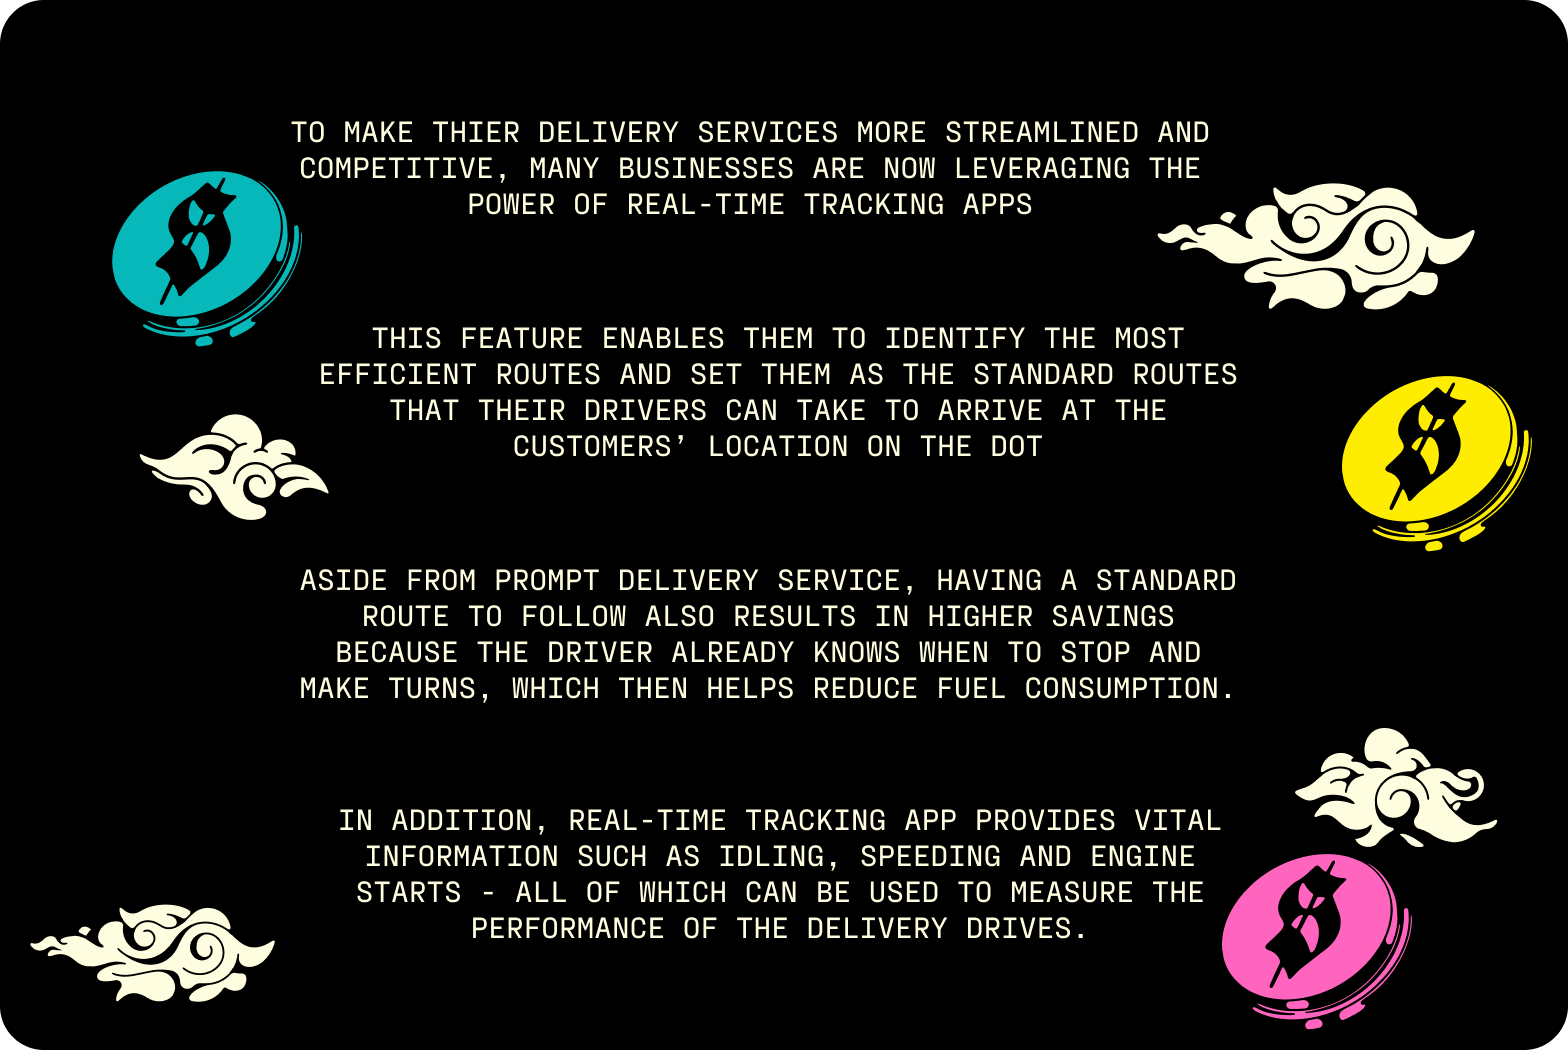 Top Benefits of Real-Time Tracking for Food Delivery Service. Source: Modern Restaurant Management